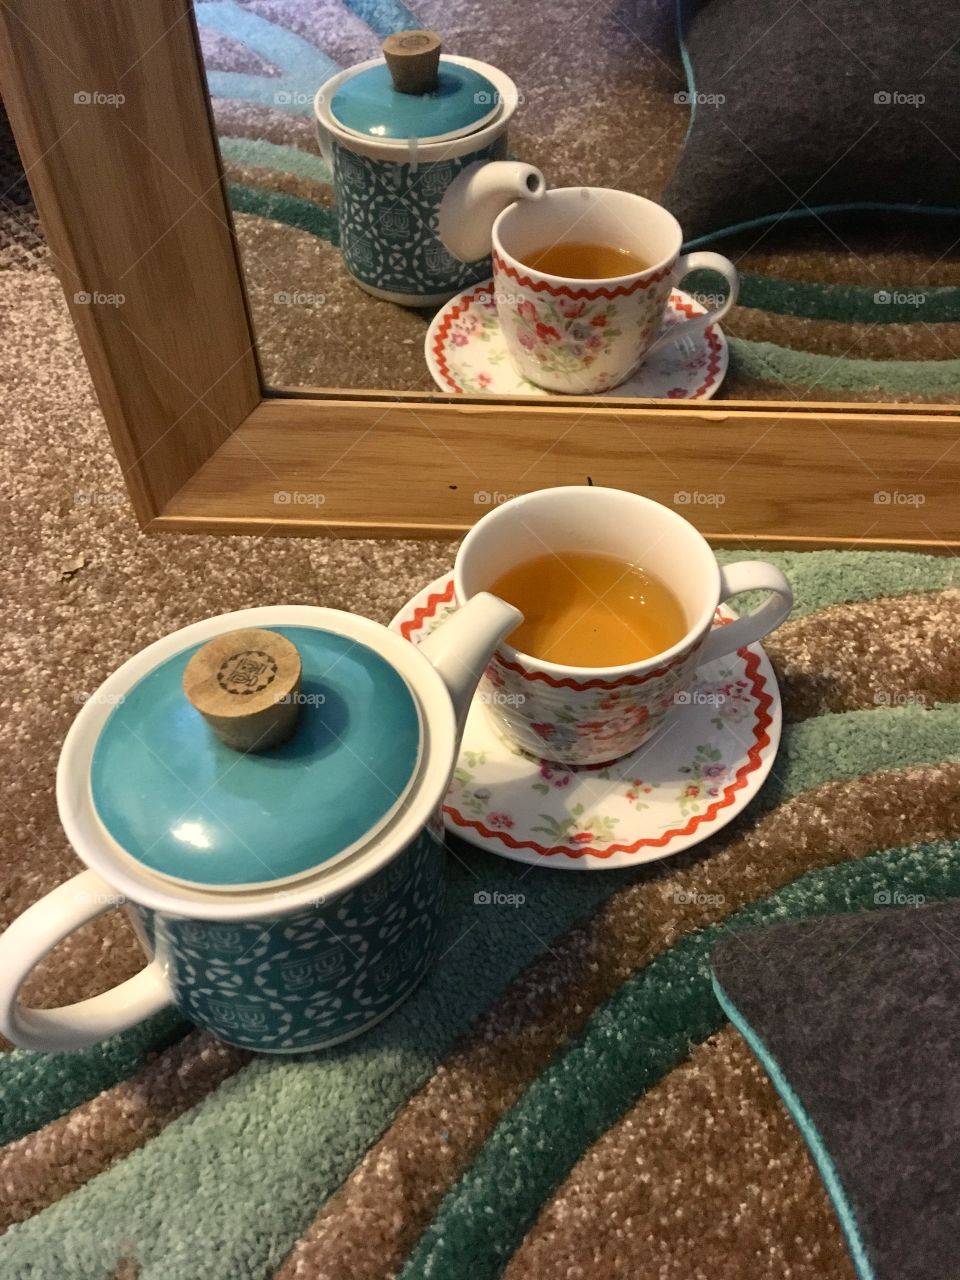 Afternoon tea, (peppermint and apple - interesting twist on a usual peppermint tea)